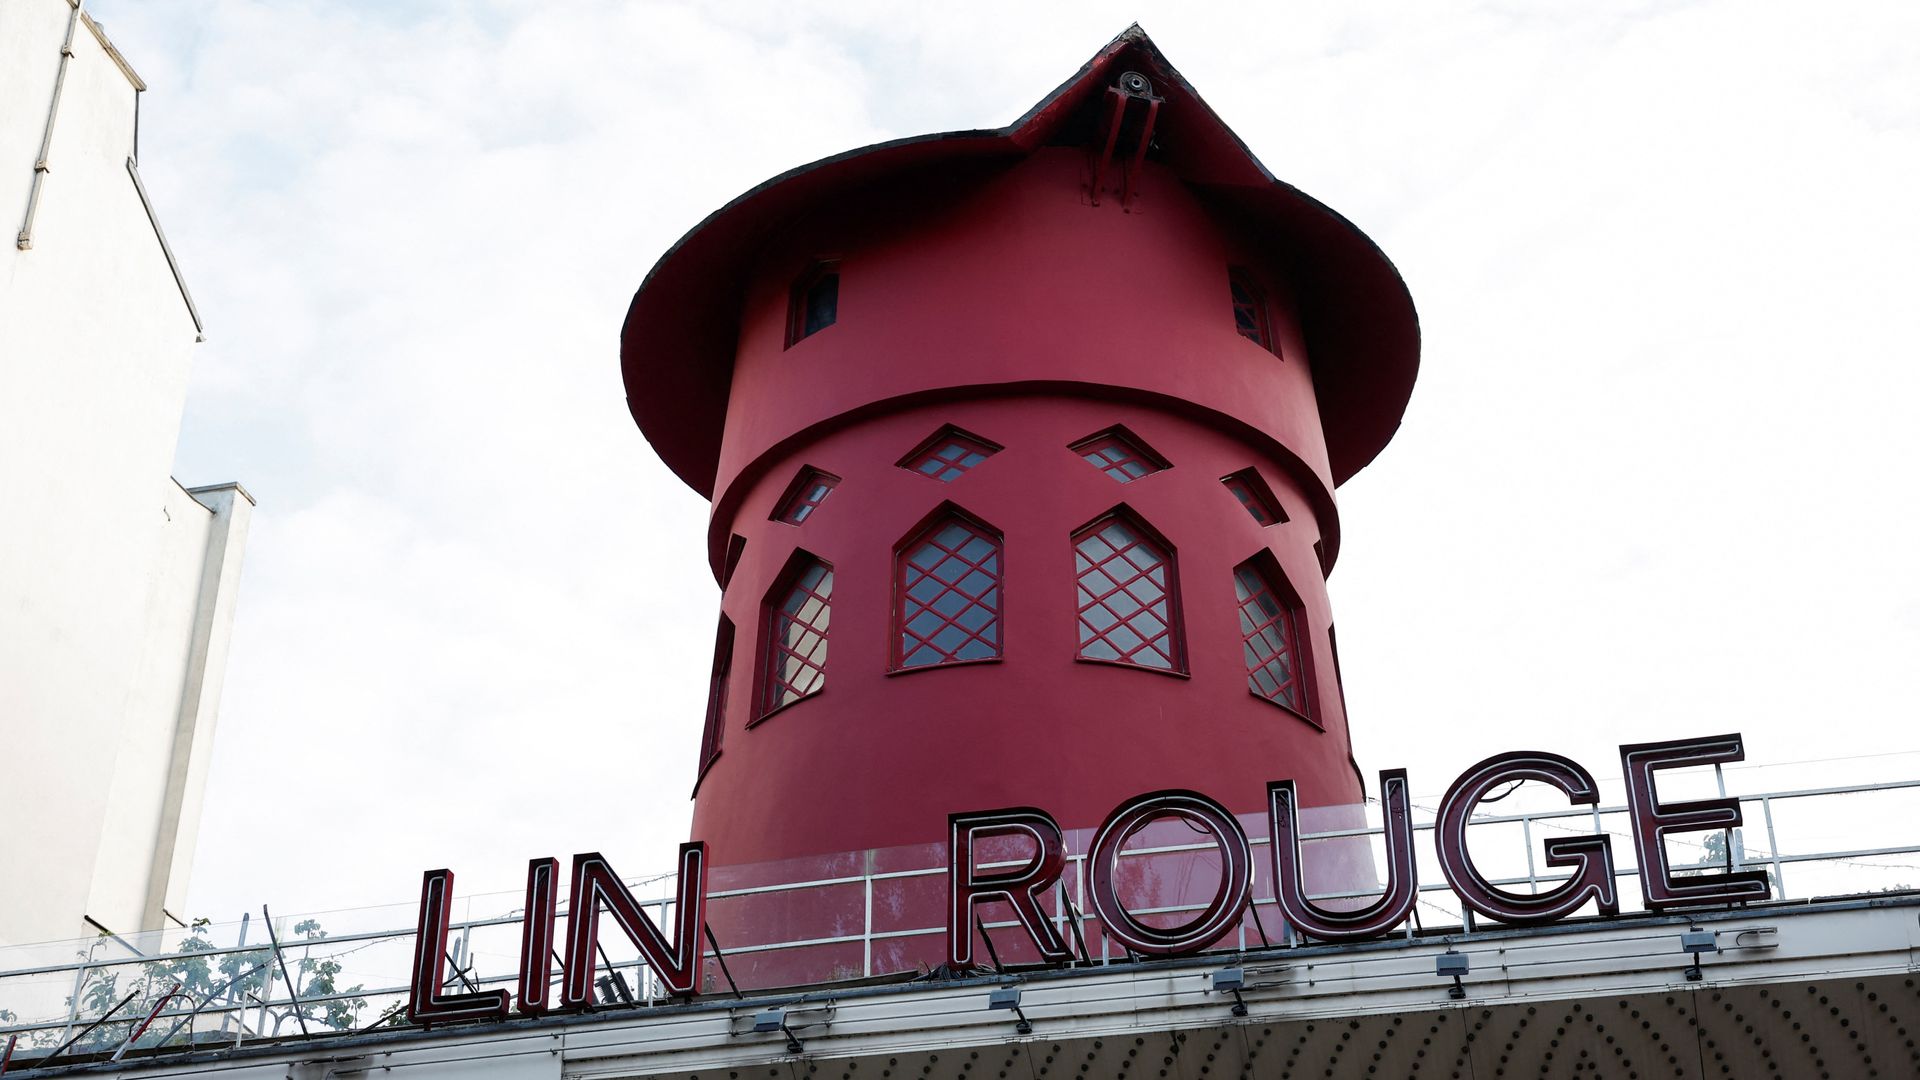 Windmill blades fall off the Moulin Rouge overnight